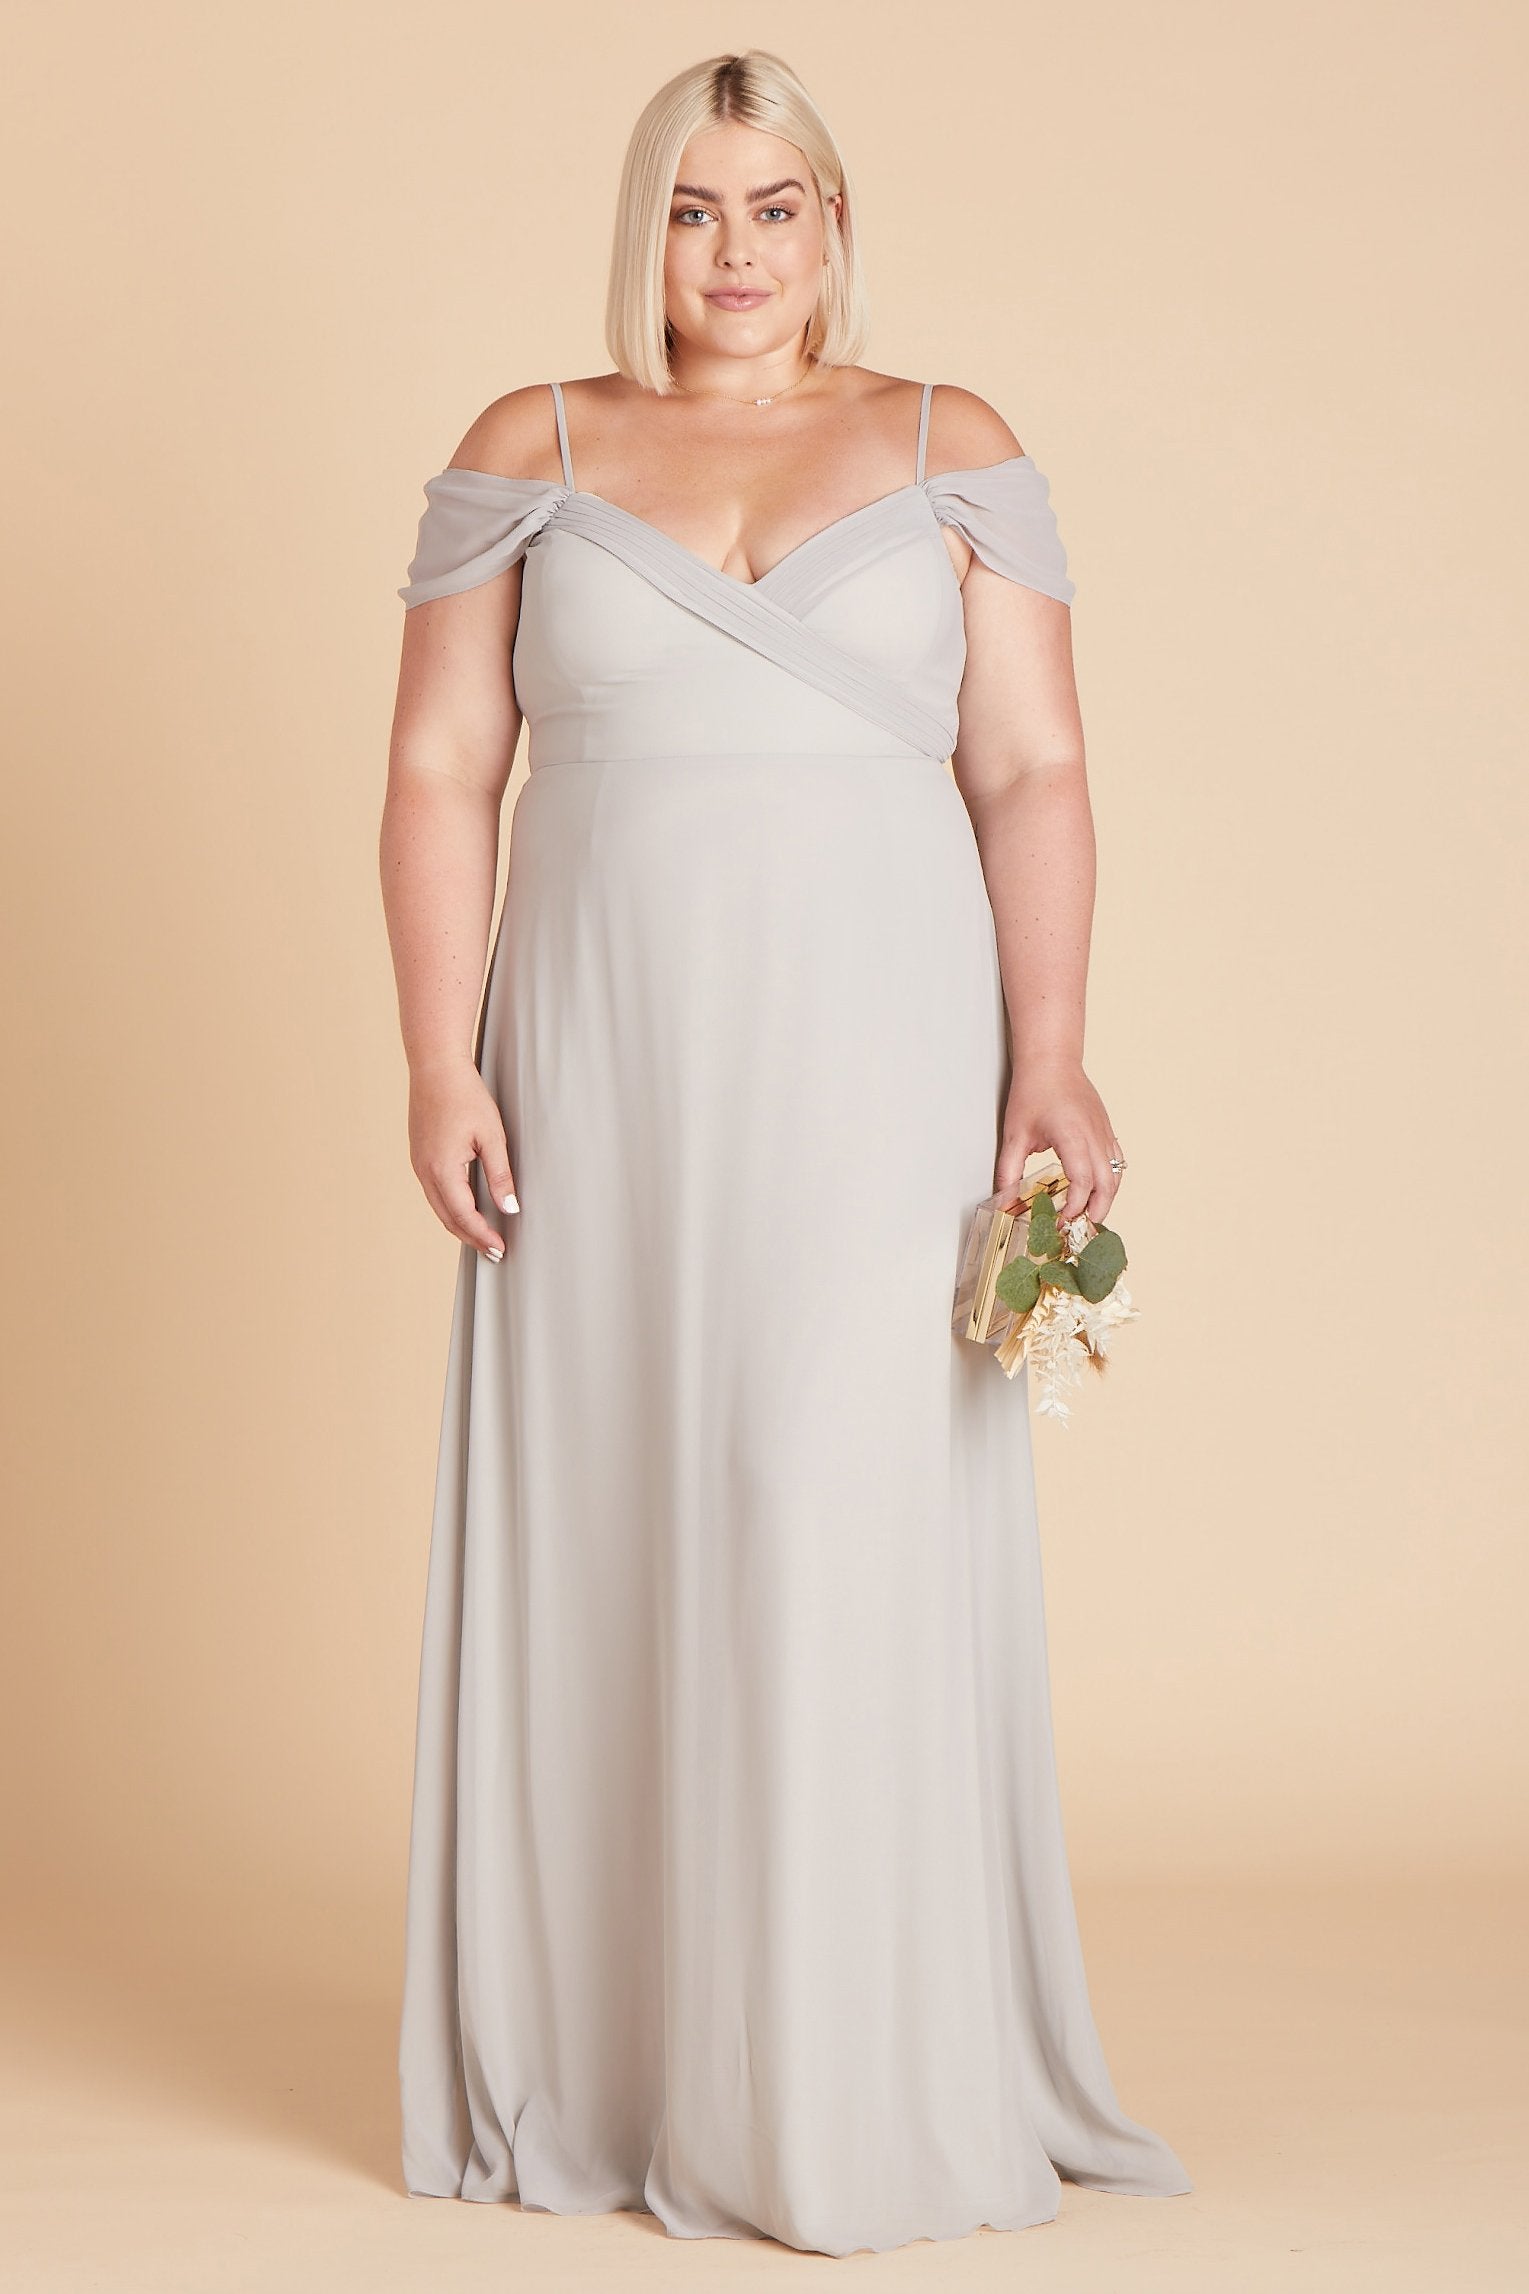 Spence convertible plus size bridesmaid dress in silver chiffon by Birdy Grey, front view